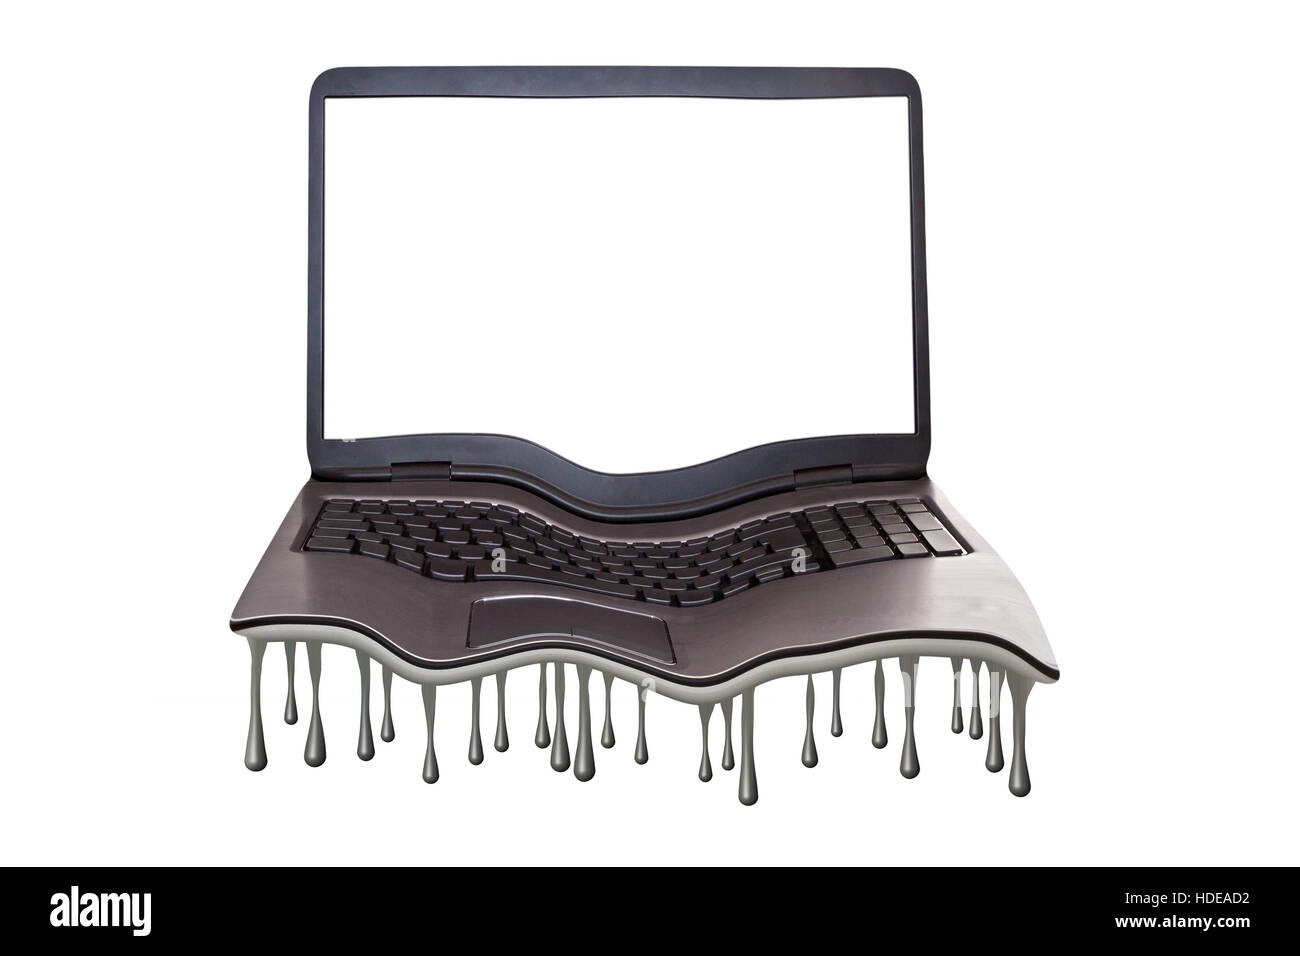 Melting laptop with drops Stock Photo